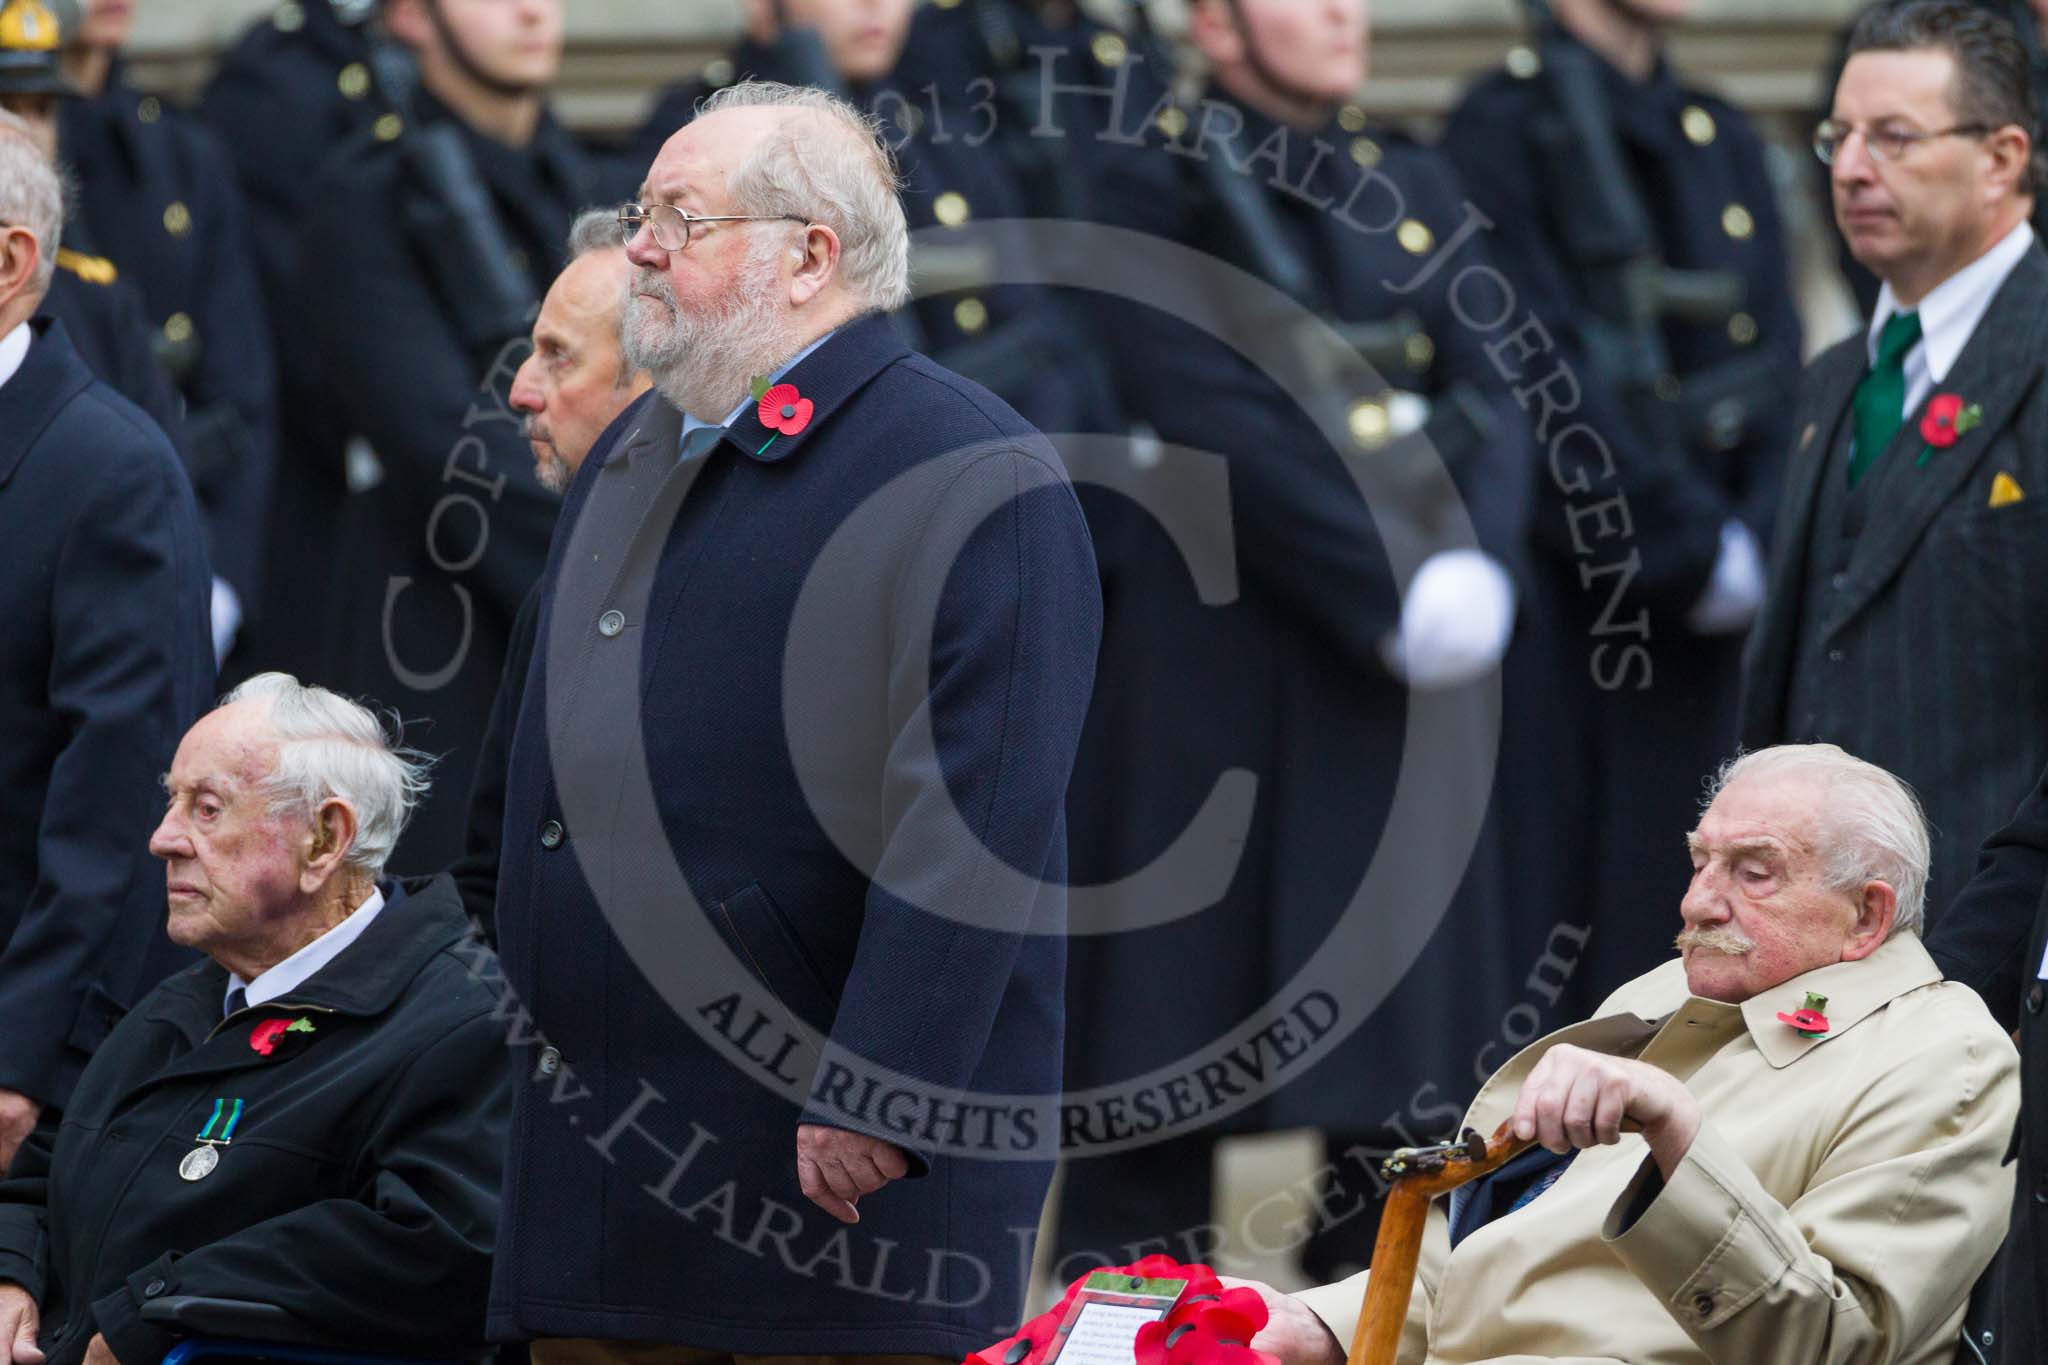 Remembrance Sunday at the Cenotaph 2015: Group B40, British Resistance Movement (Coleshill Auxiliary Research Team).
Cenotaph, Whitehall, London SW1,
London,
Greater London,
United Kingdom,
on 08 November 2015 at 11:44, image #313